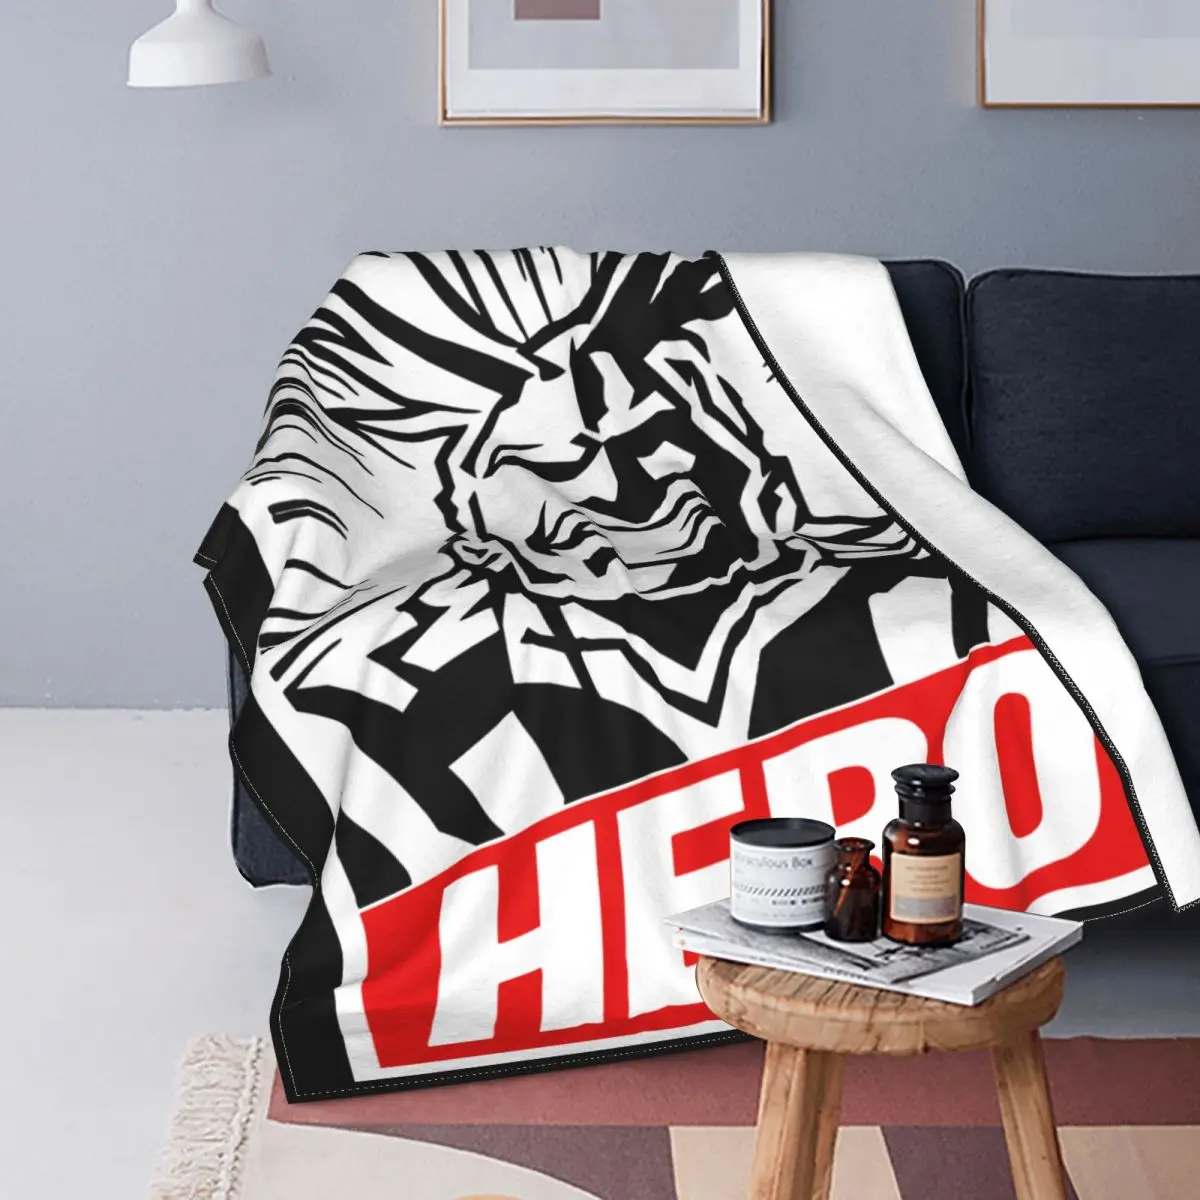 

My Hero Academia Boku No Hero Academia All Might Blankets Fuzzy Awesome Warm Throw Blanket for Chair Covering Sofa Decoration